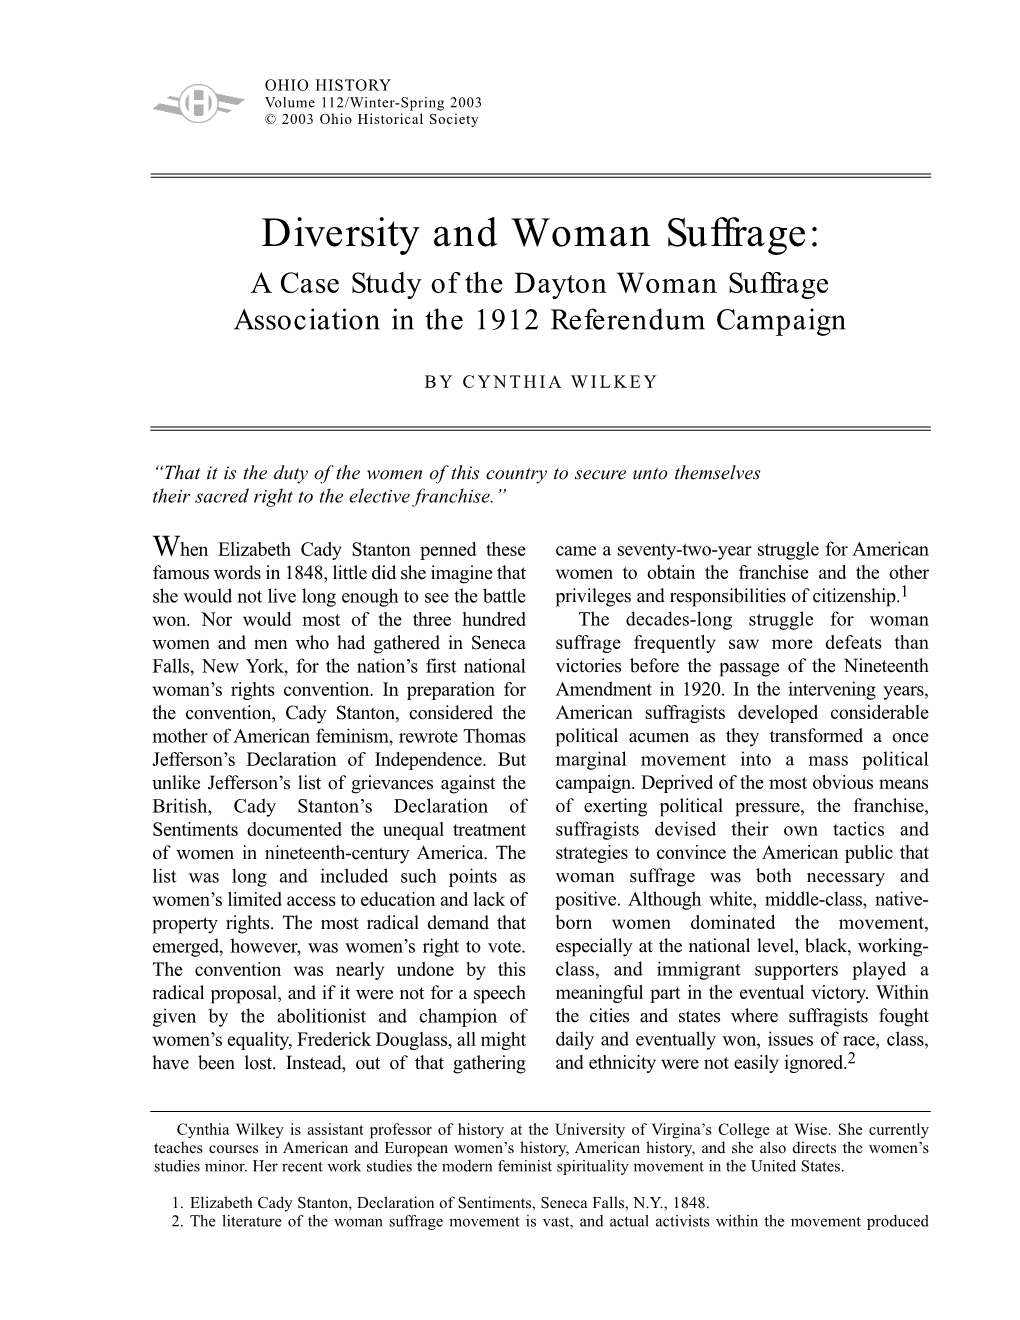 Diversity and Woman Suffrage: a Case Study of the Dayton Woman Suffrage Association in the 1912 Referendum Campaign